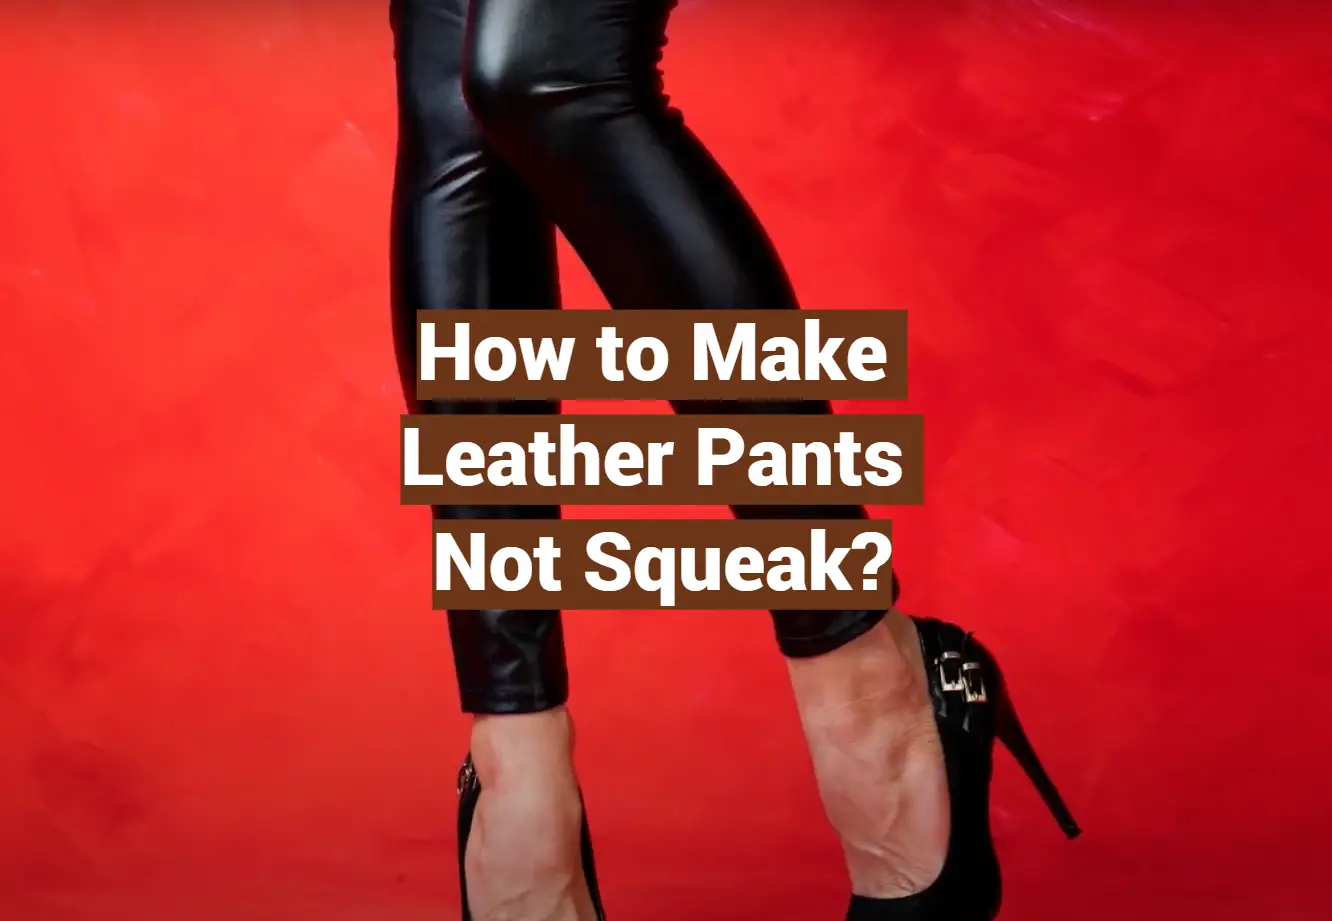 How to Make Leather Pants Not Squeak?